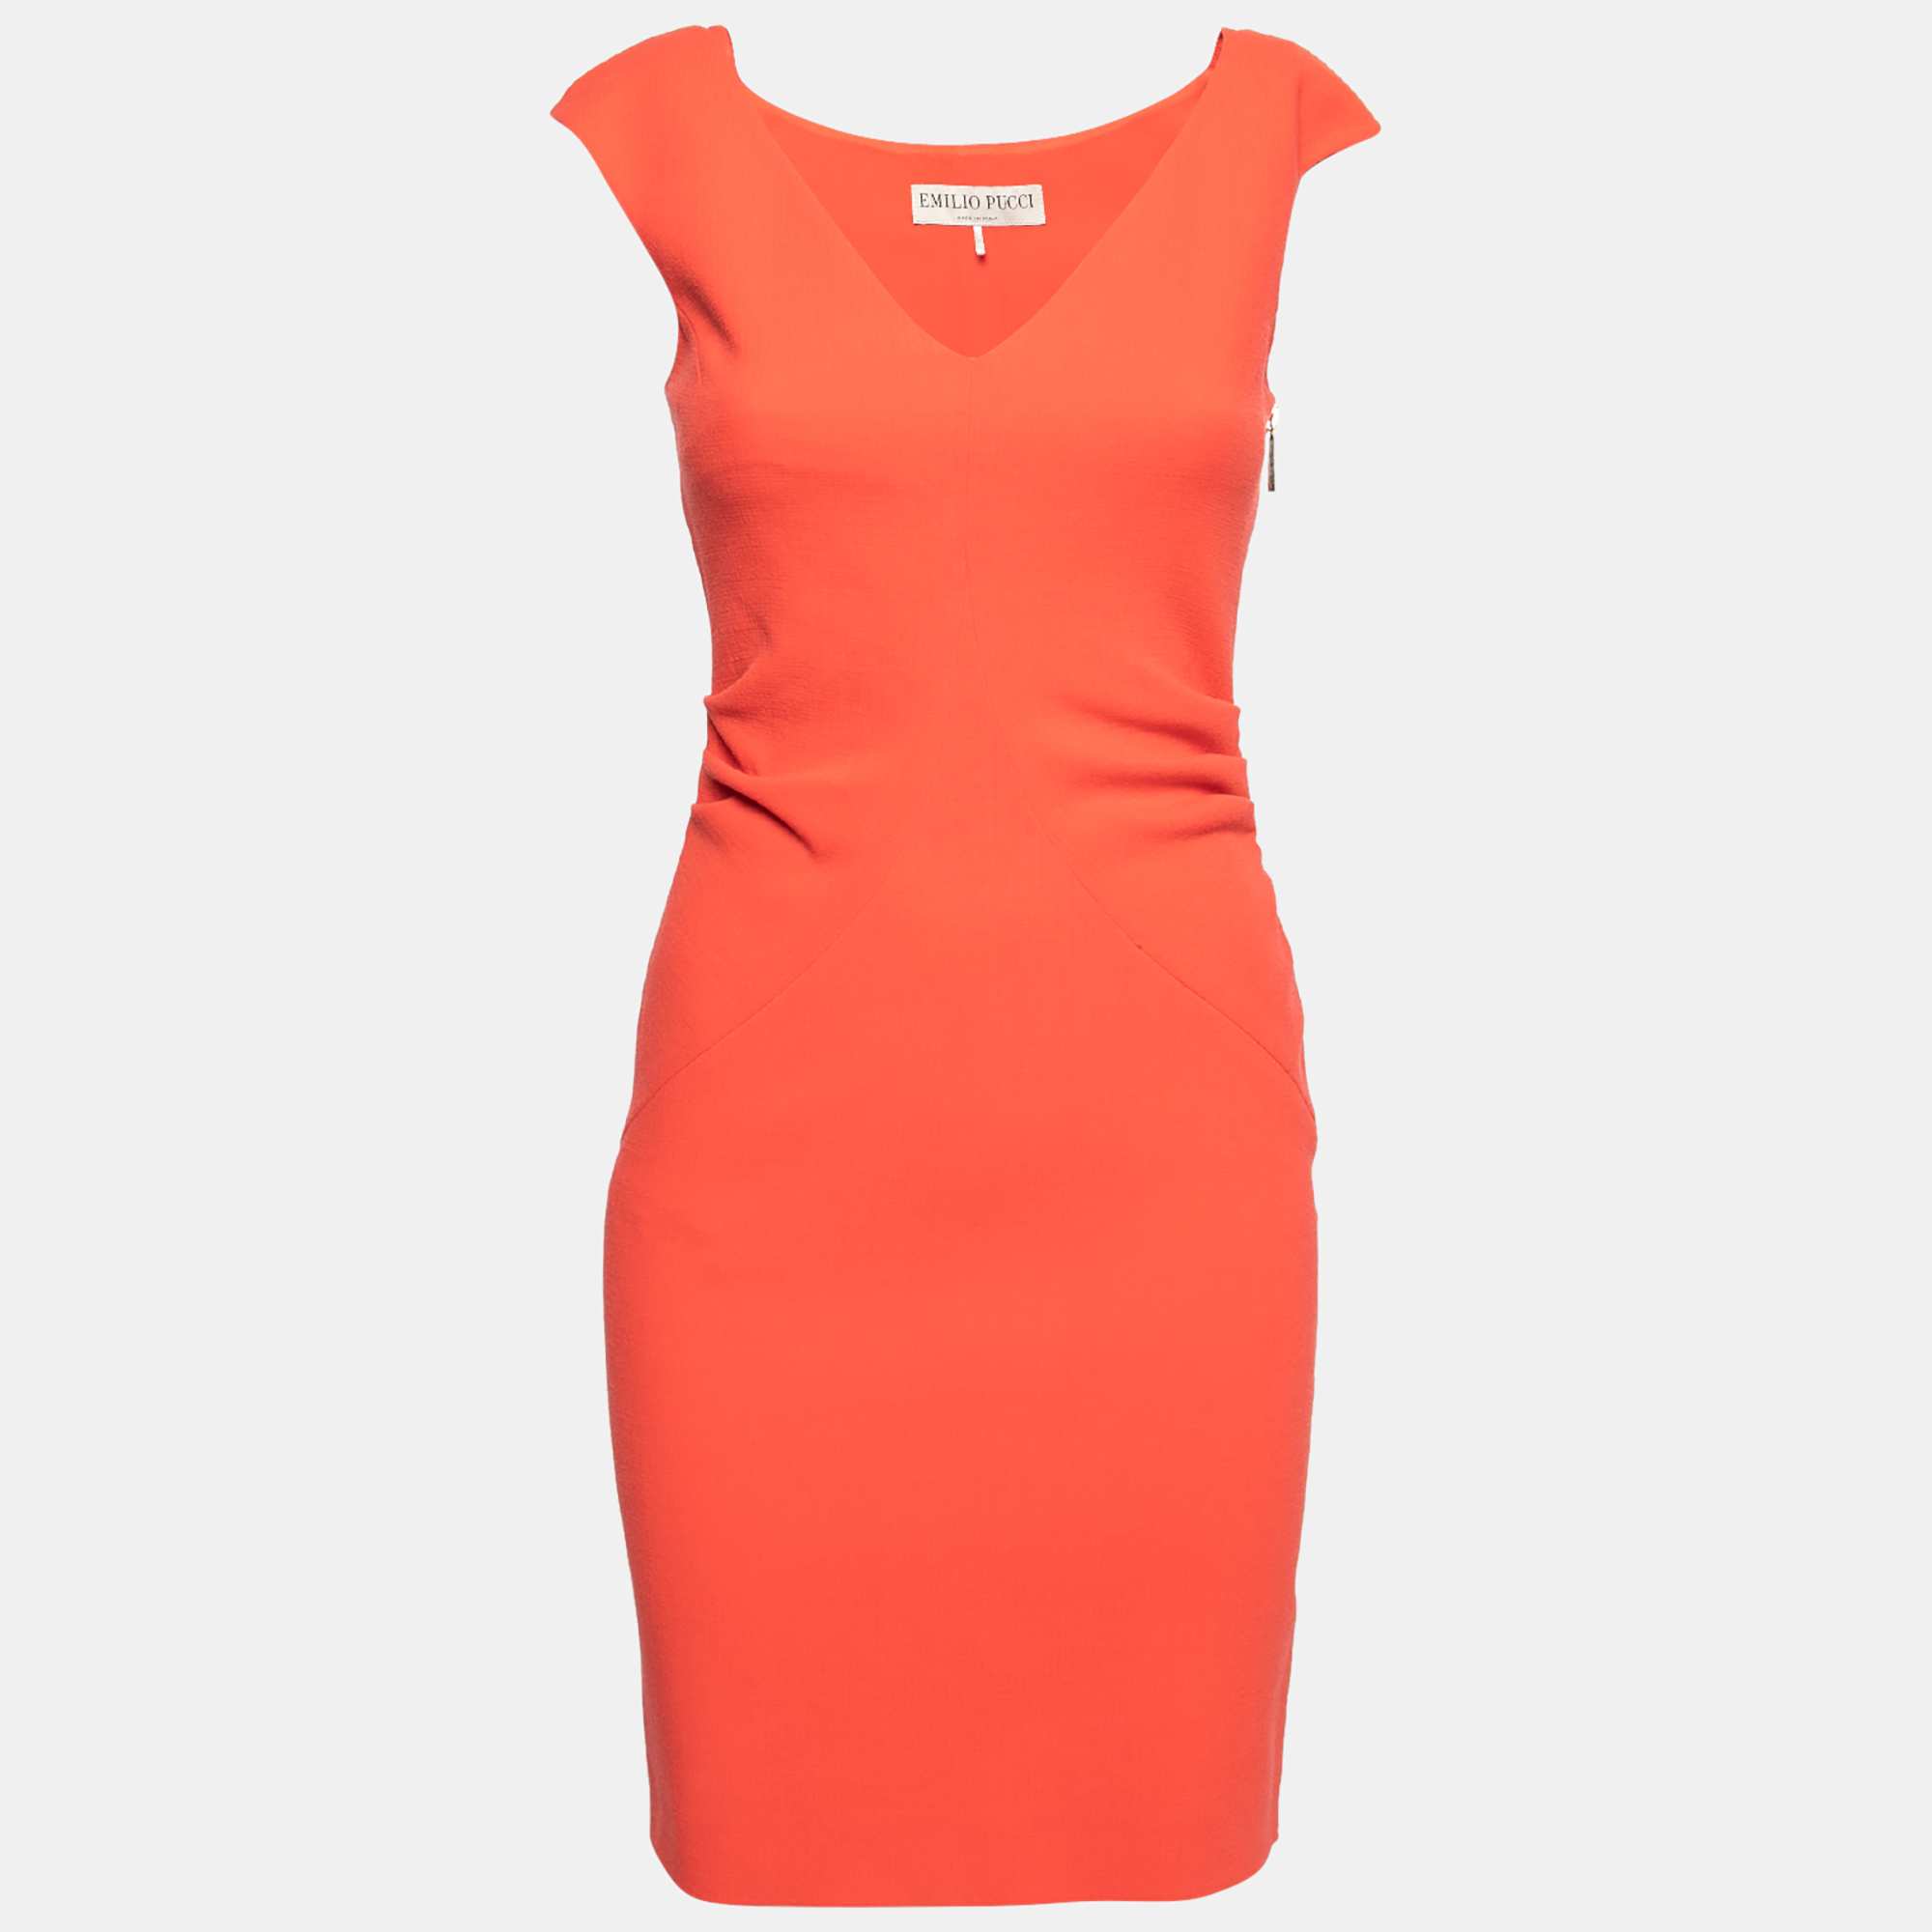 Emilio pucci coral wool gathered detail sleeveless dress s